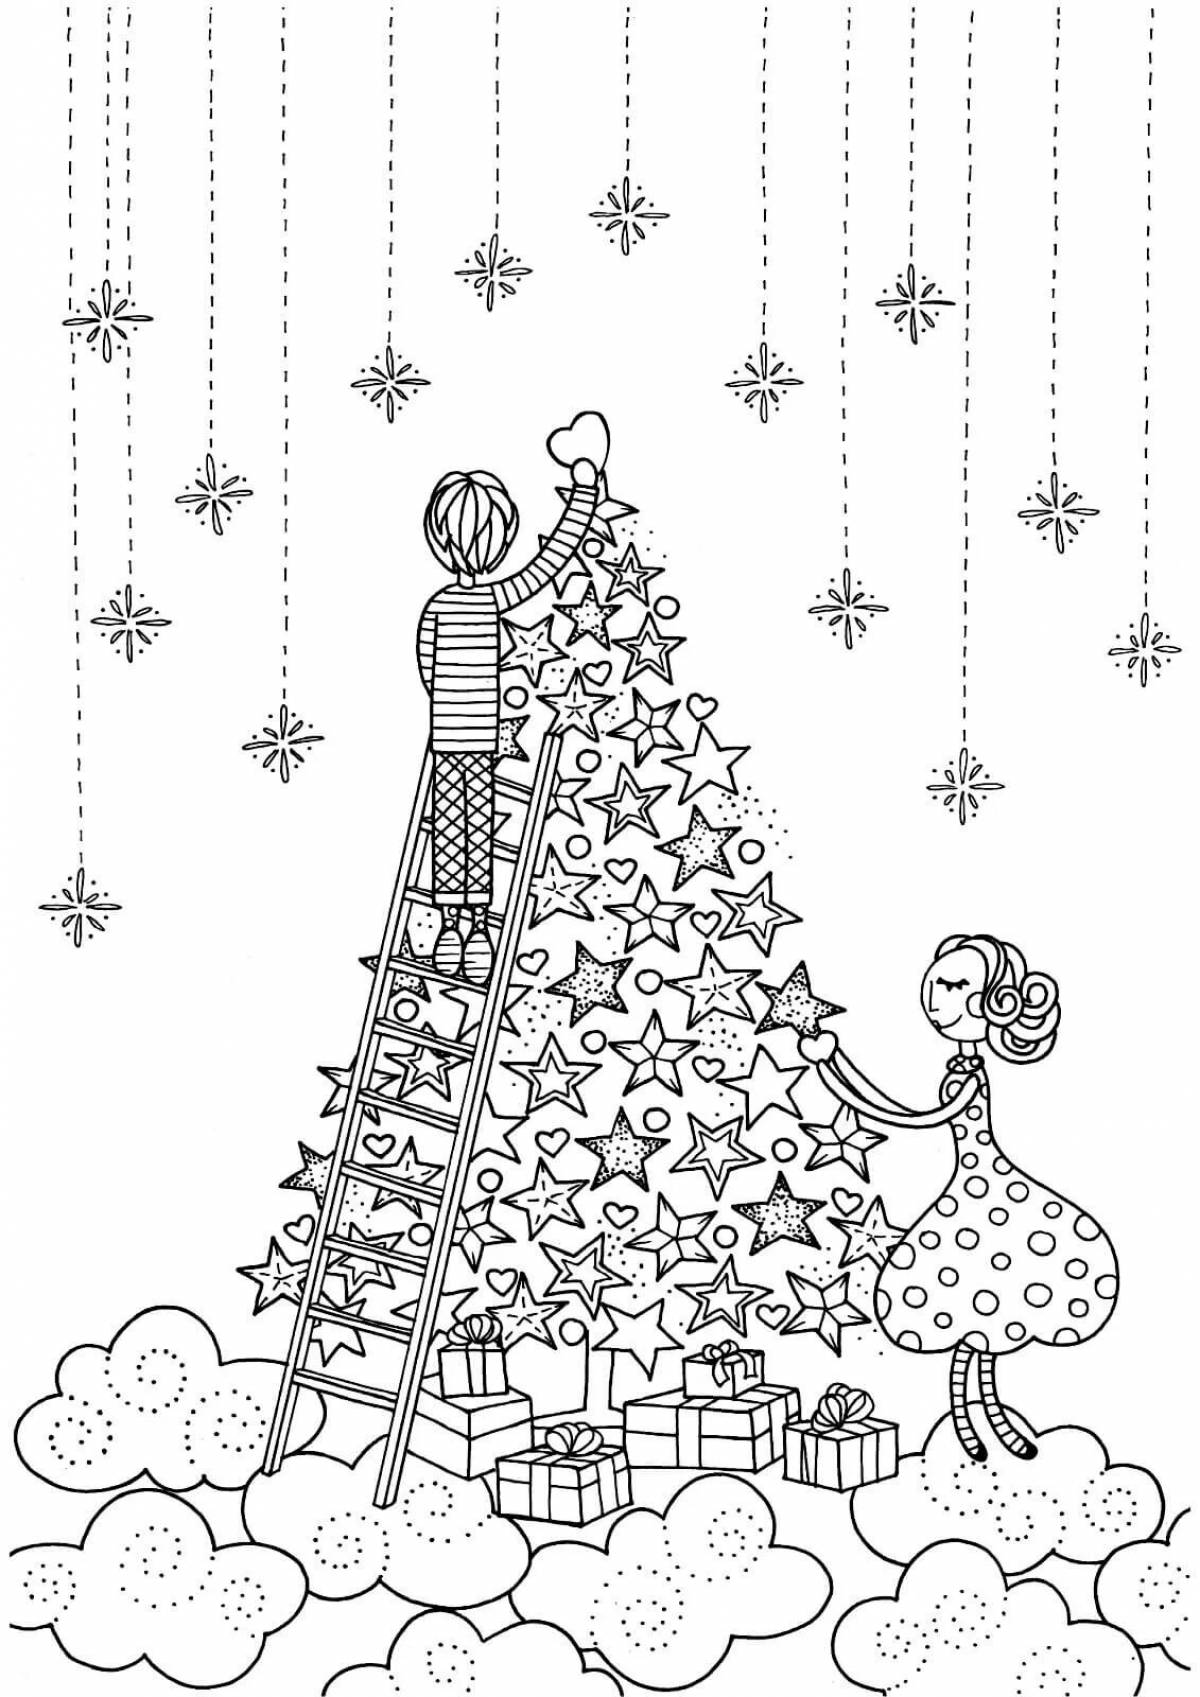 Sublime coloring page stress relief christmas